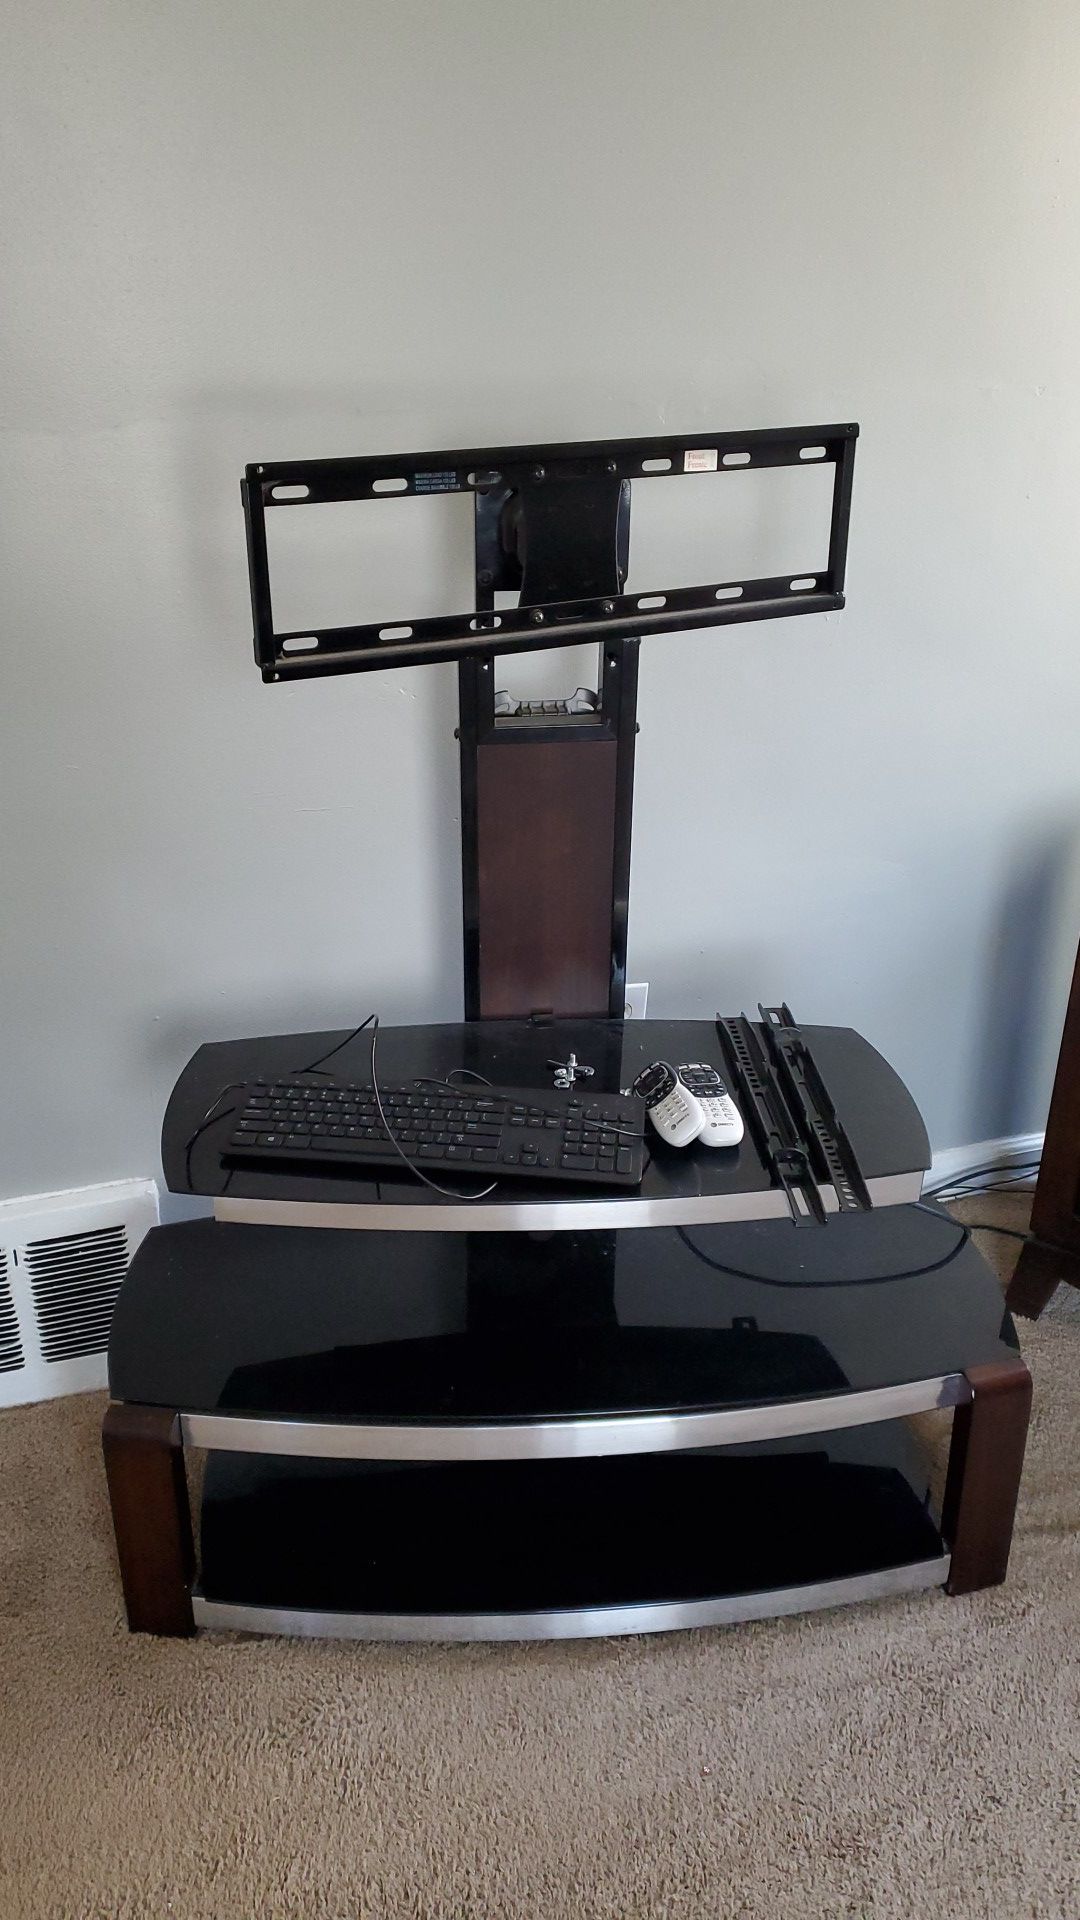 40-55 inch TV stand